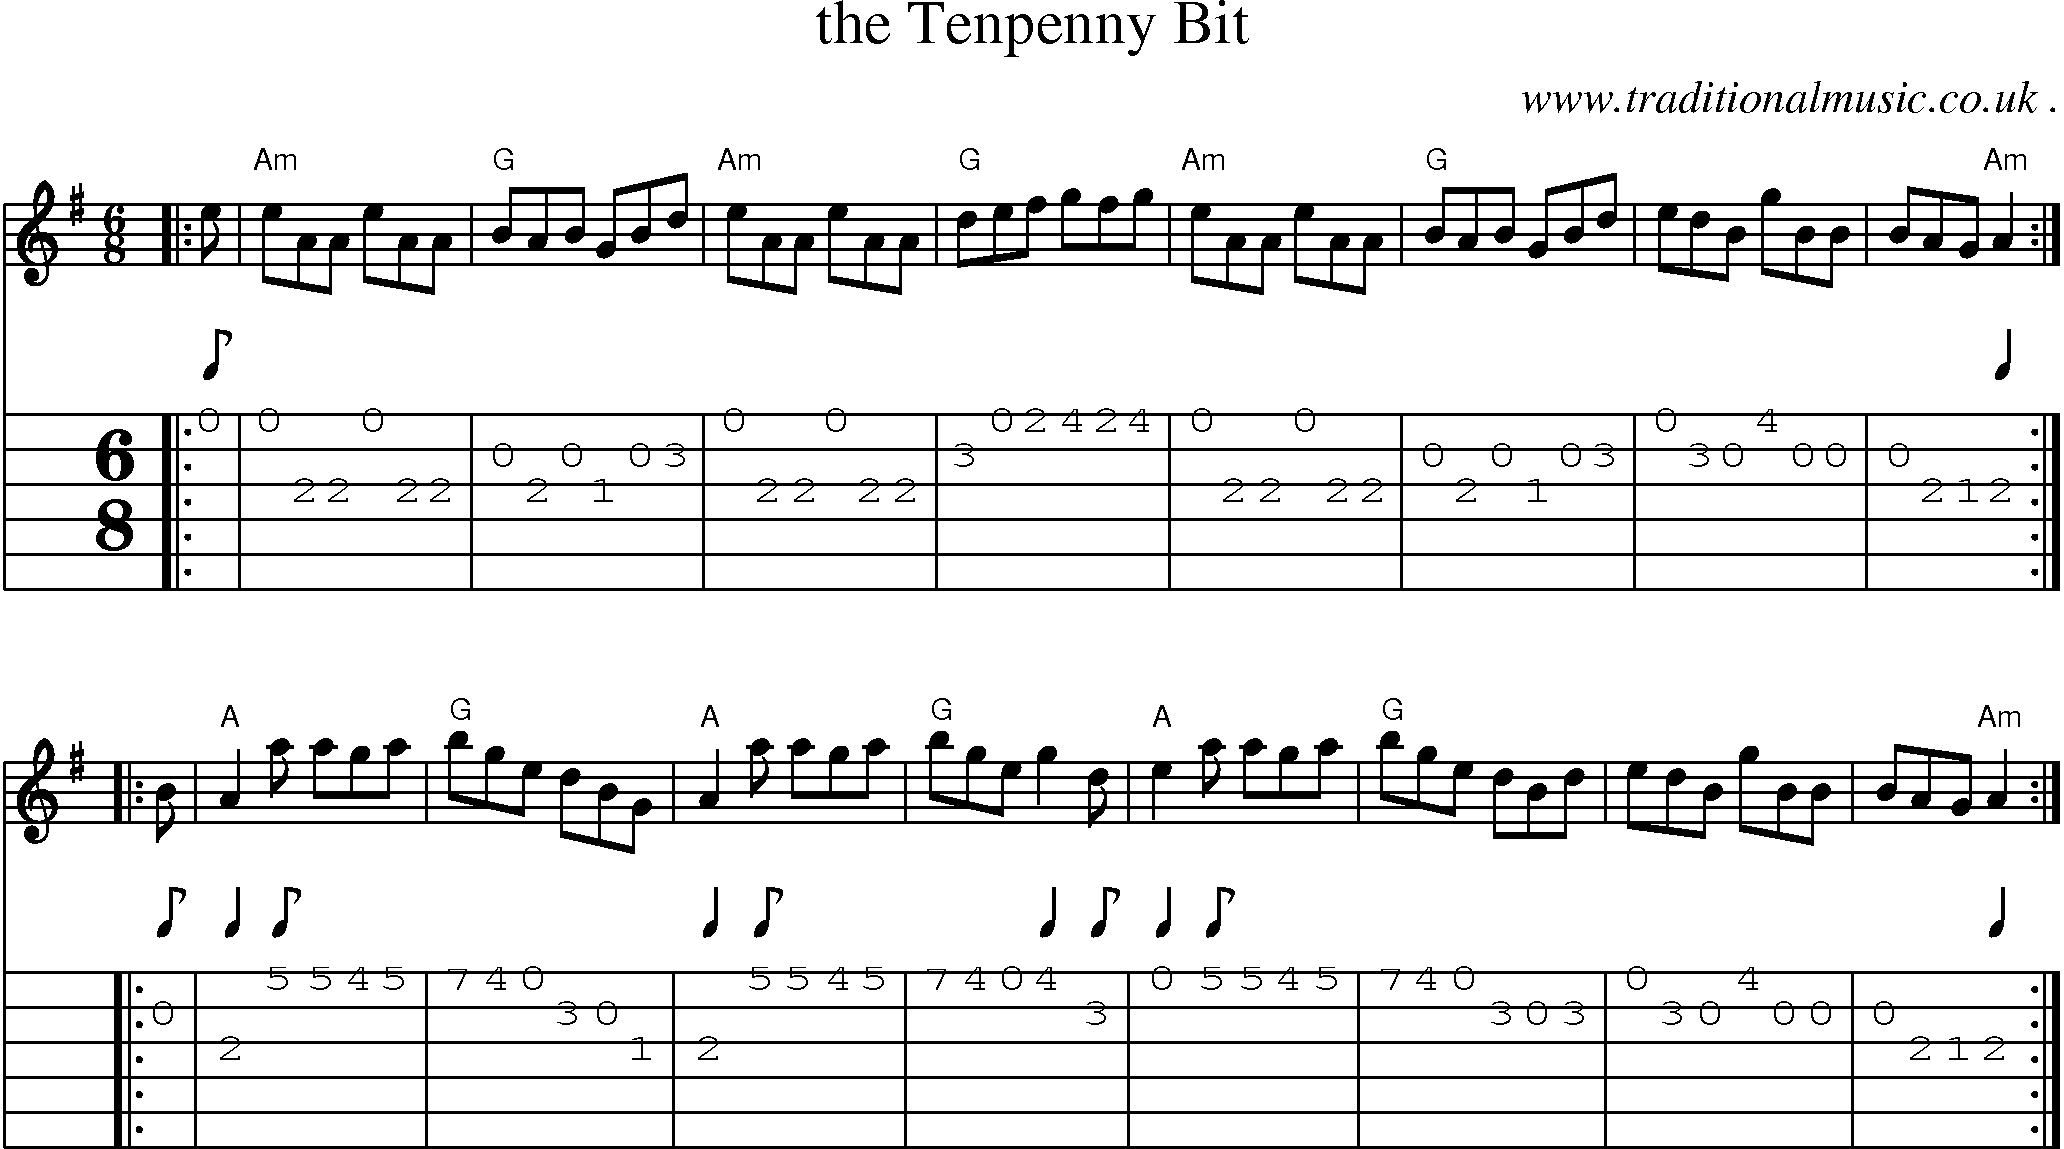 Sheet-music  score, Chords and Guitar Tabs for The Tenpenny Bit